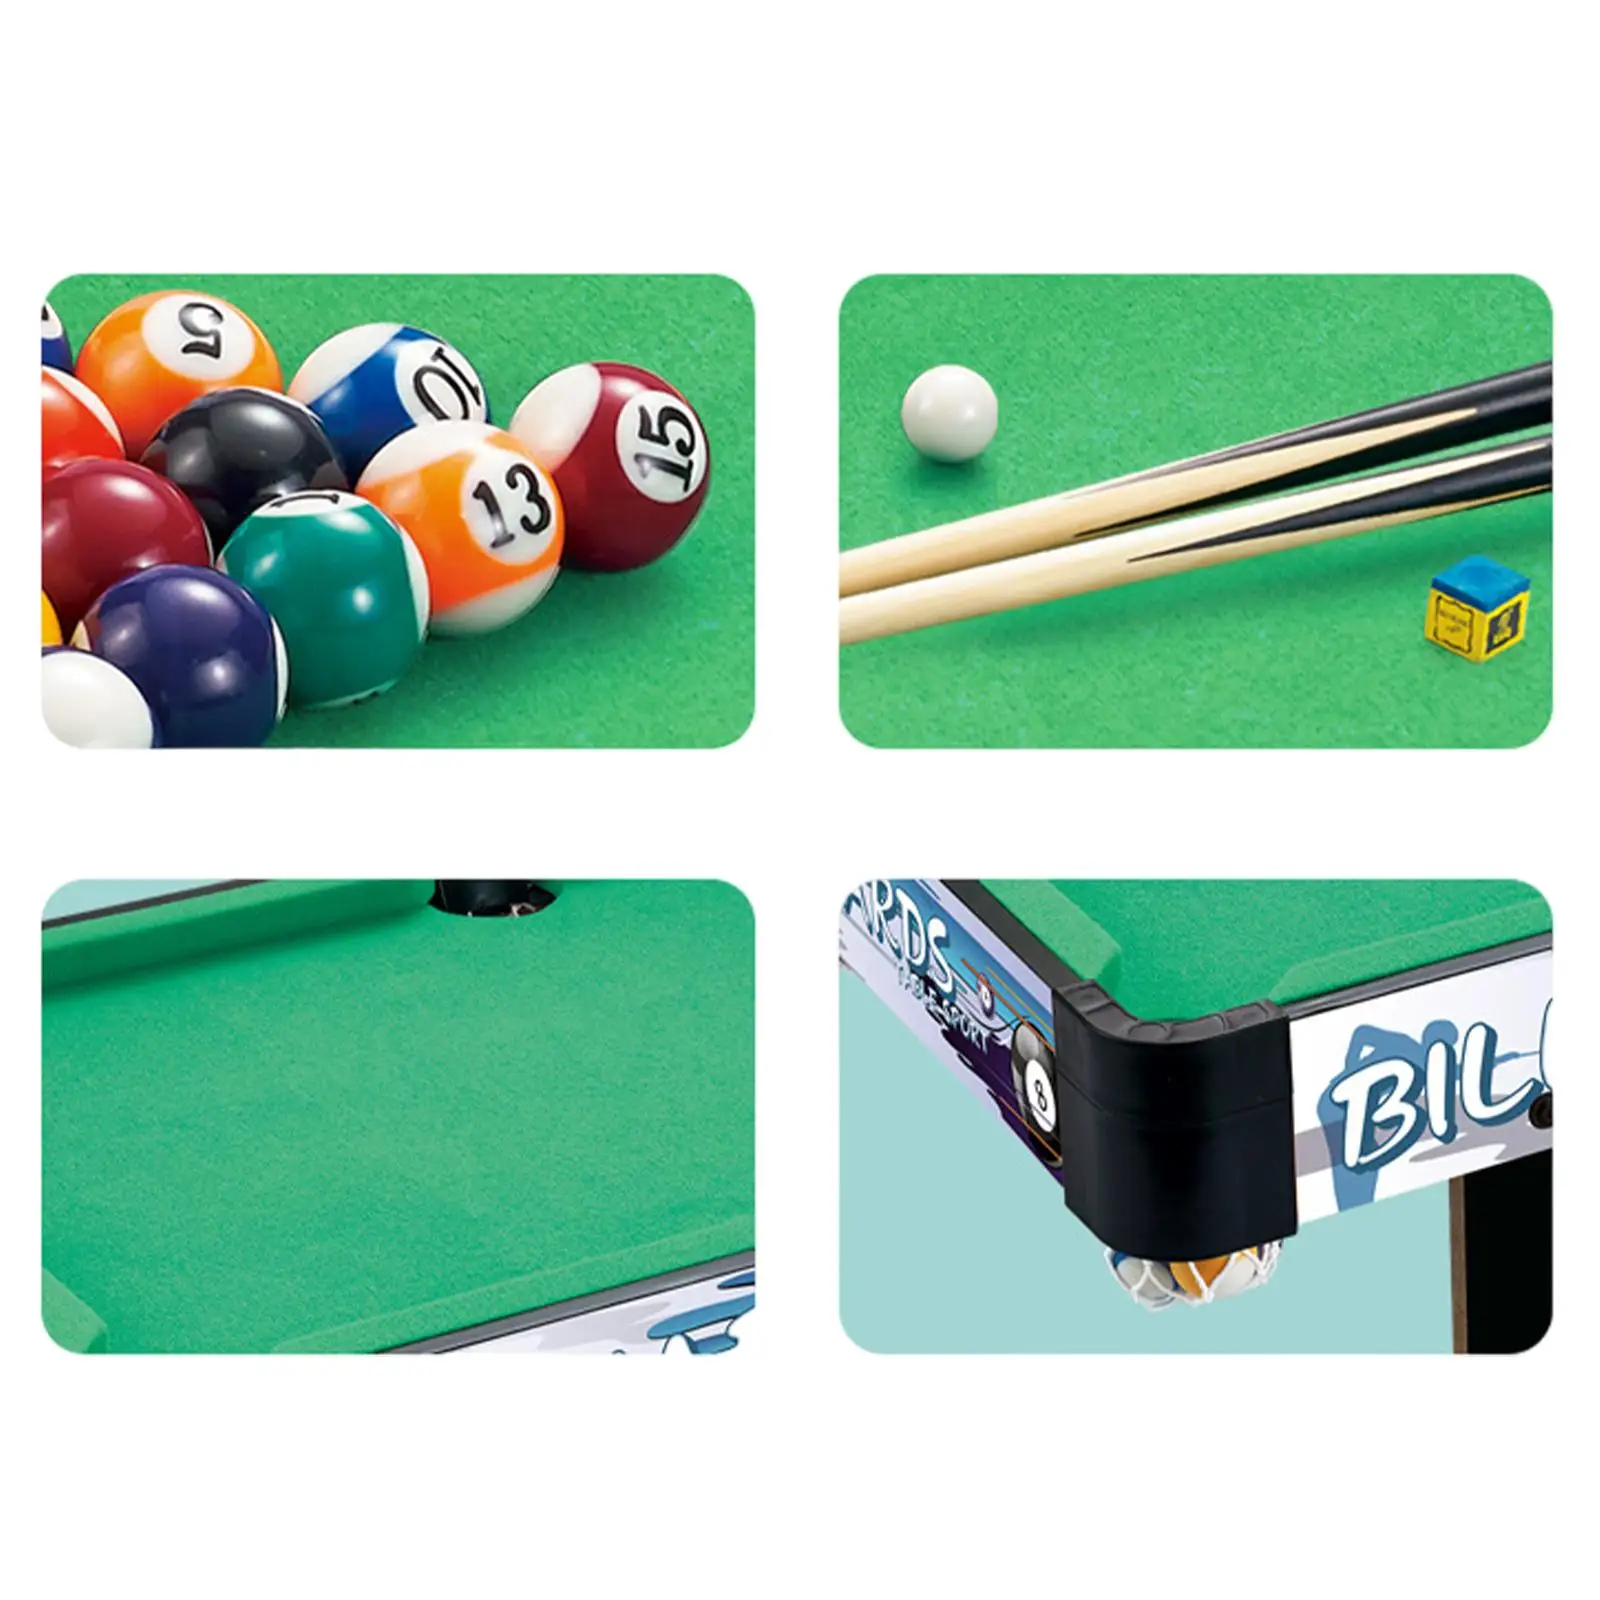 Billiard Pool Set Desktop Snooker 15 Colorful Balls, 1 Cue Ball Leisure Game Toy Small Tabletop Billiards for Home Office Use